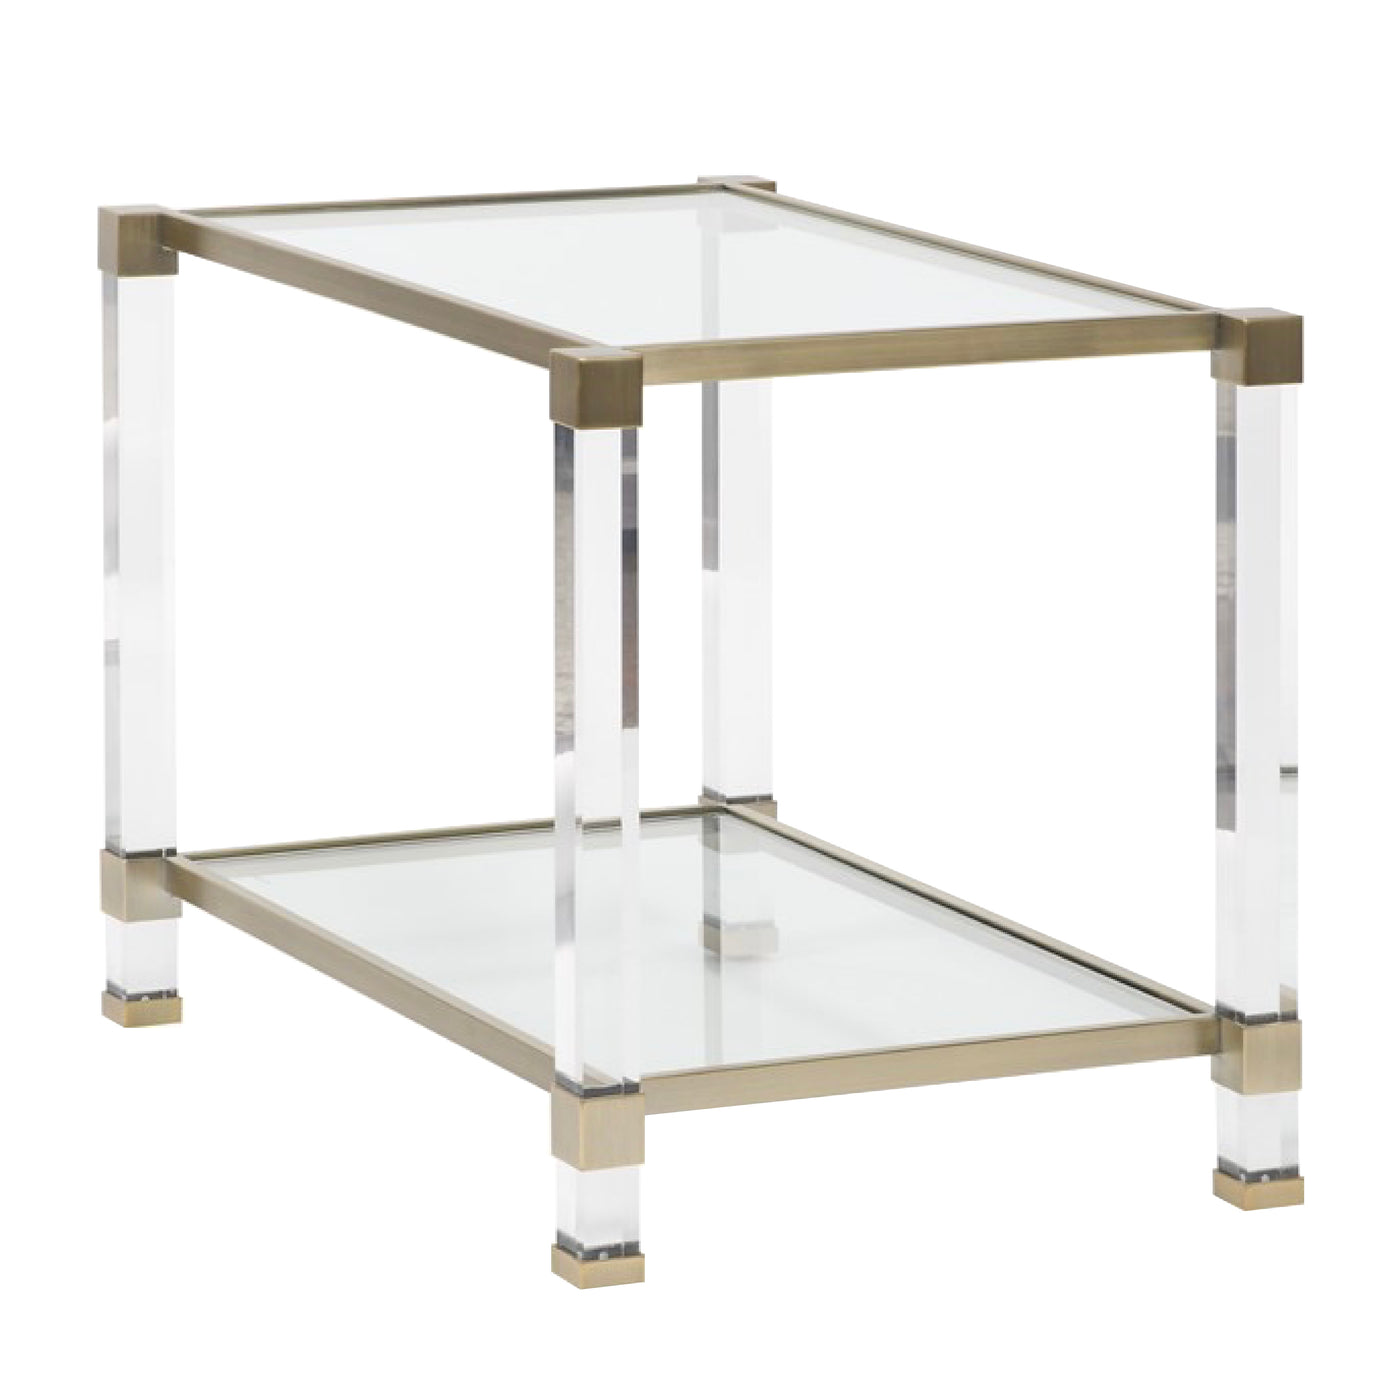 SIDE TABLE SATIN BRASS GLASS 2-TIER